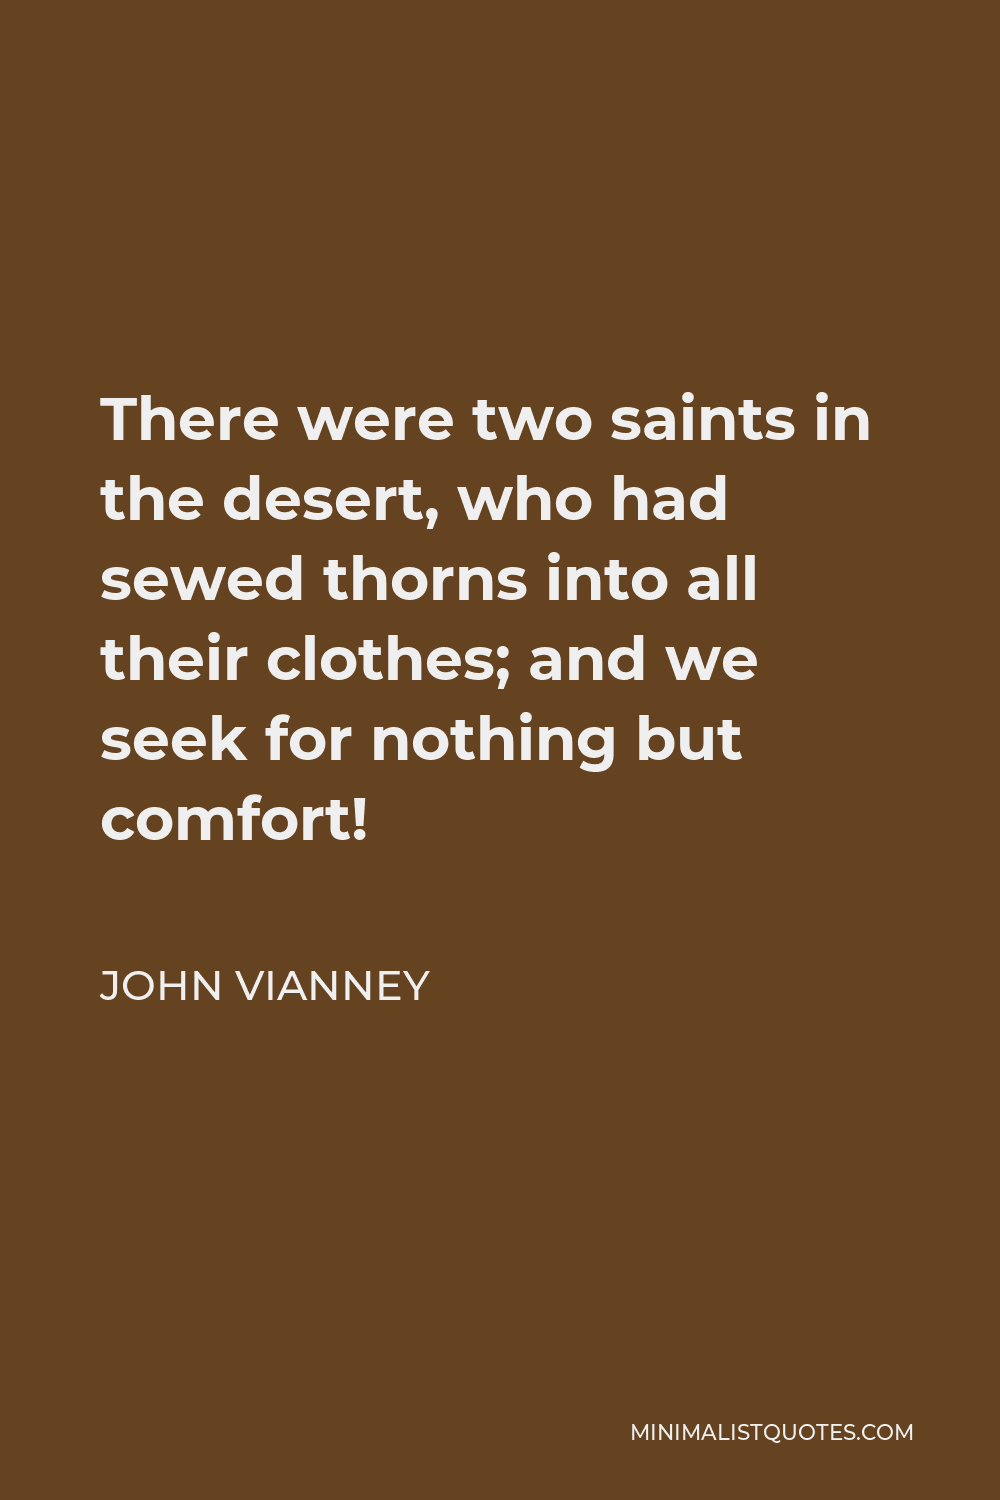 John Vianney Quote - There were two saints in the desert, who had sewed thorns into all their clothes; and we seek for nothing but comfort!